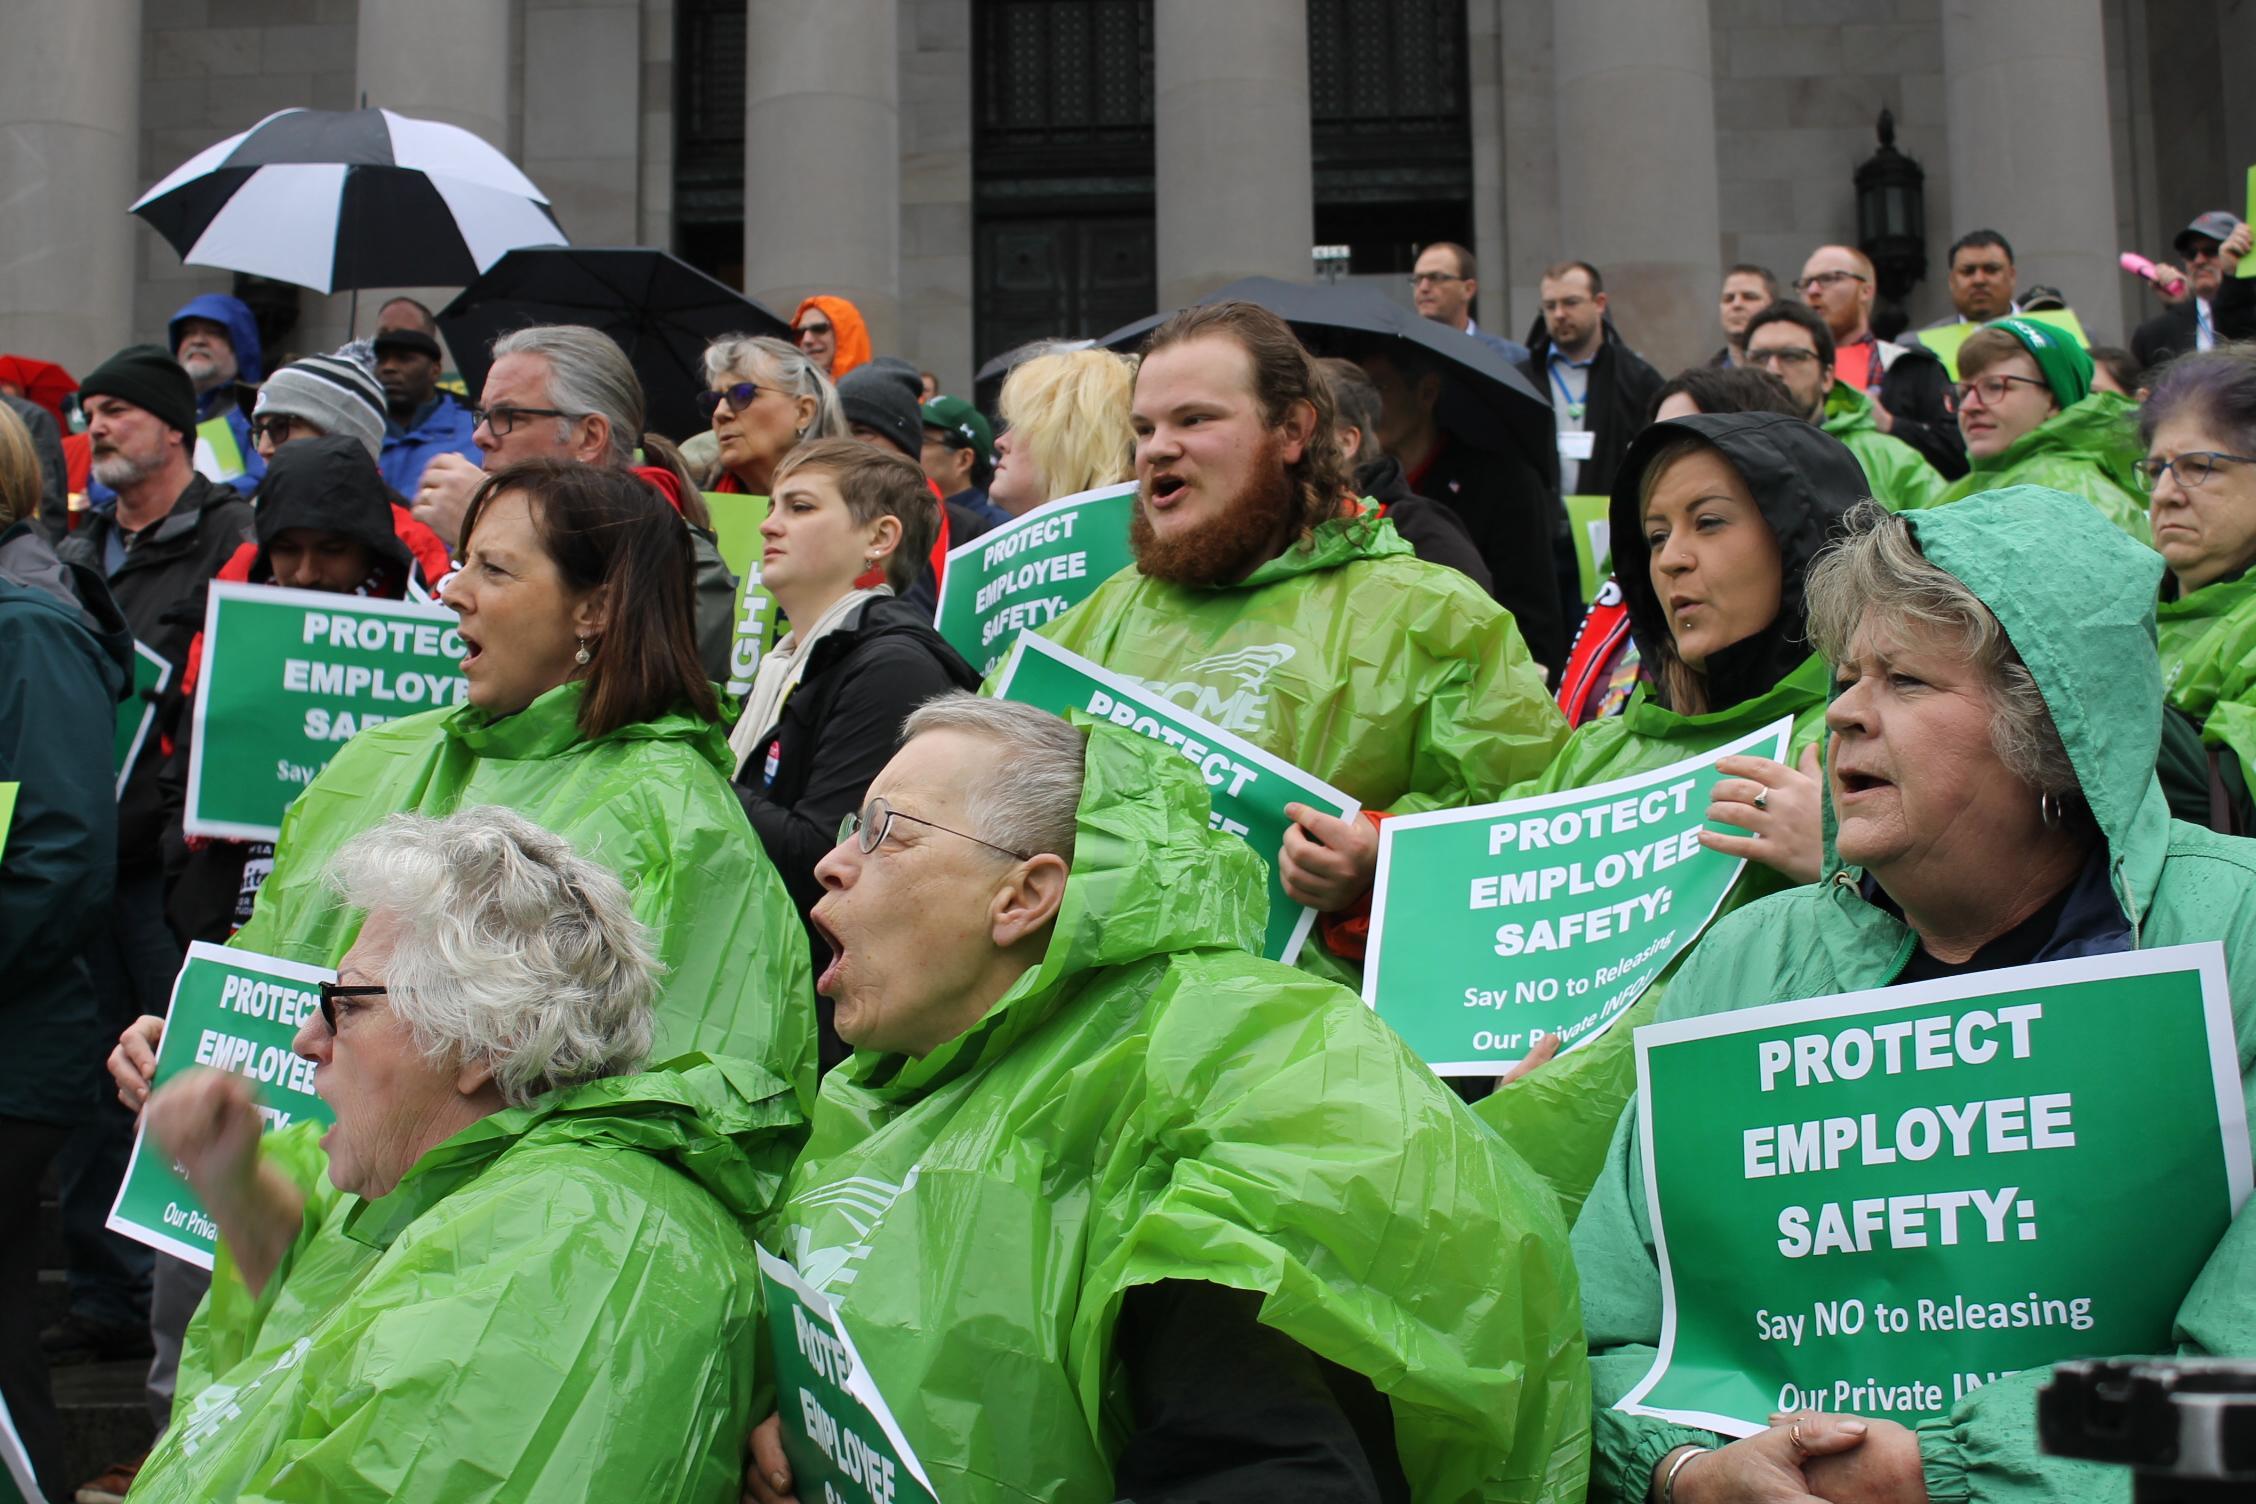 WFSE union members in green rain ponchos hold protest signs about protecting private info during a rally on the Olympia Capitol steps.